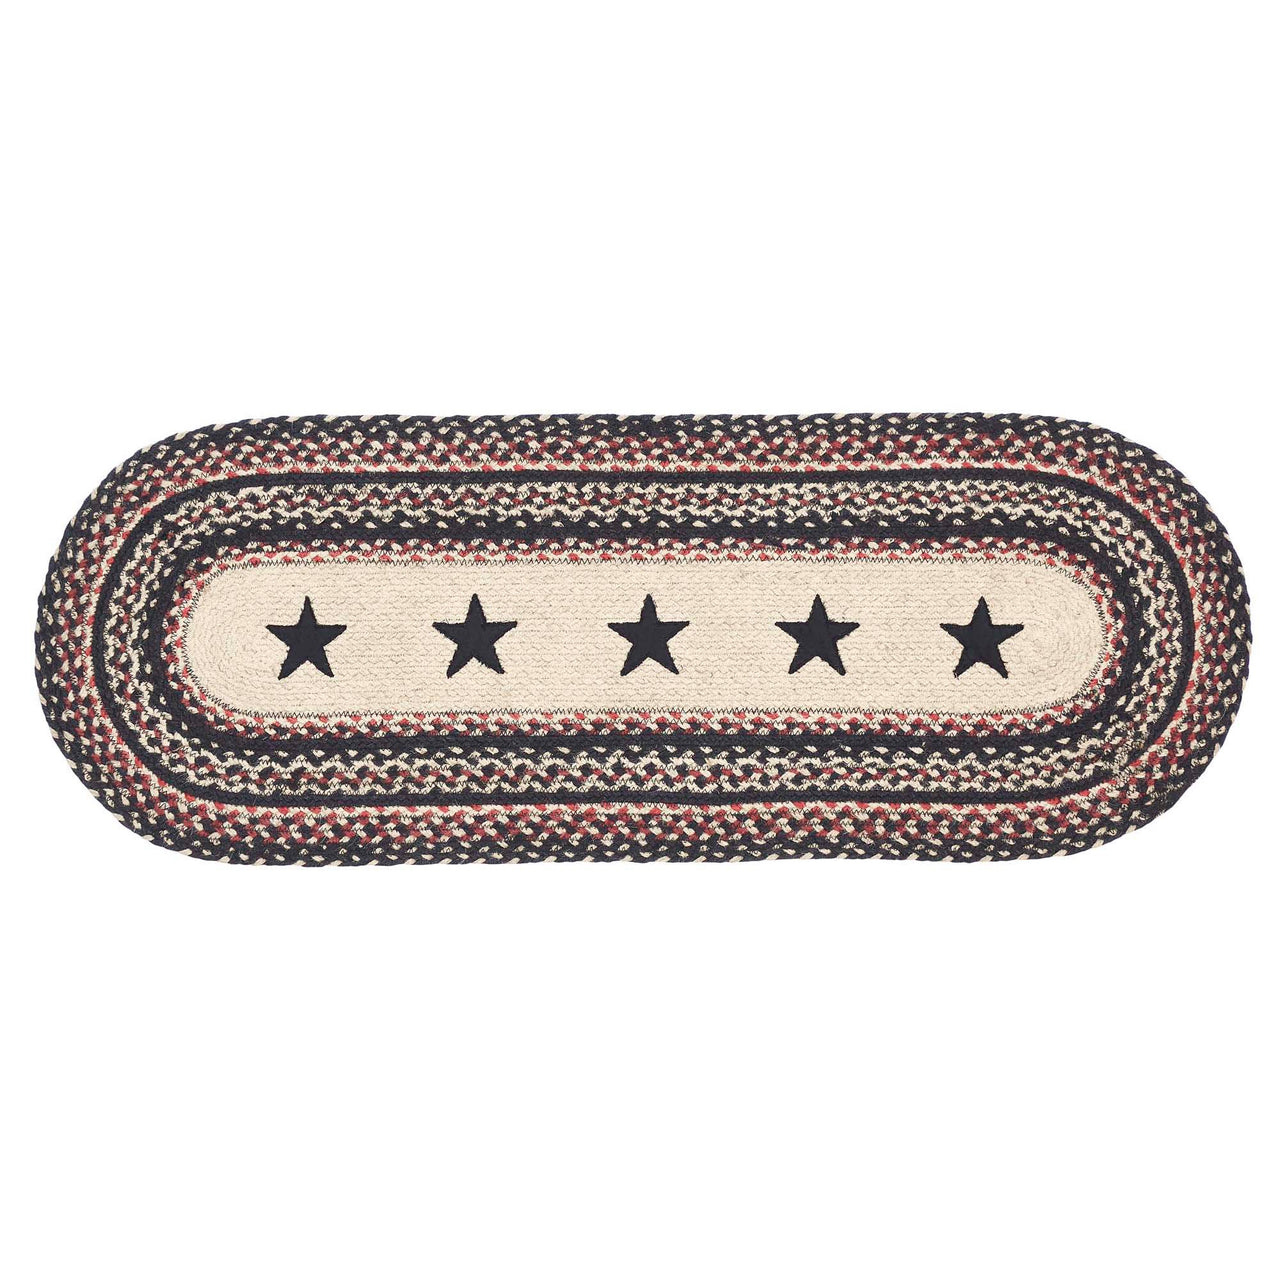 Colonial Star Jute Braided Runner Oval 13"x36" VHC Brands